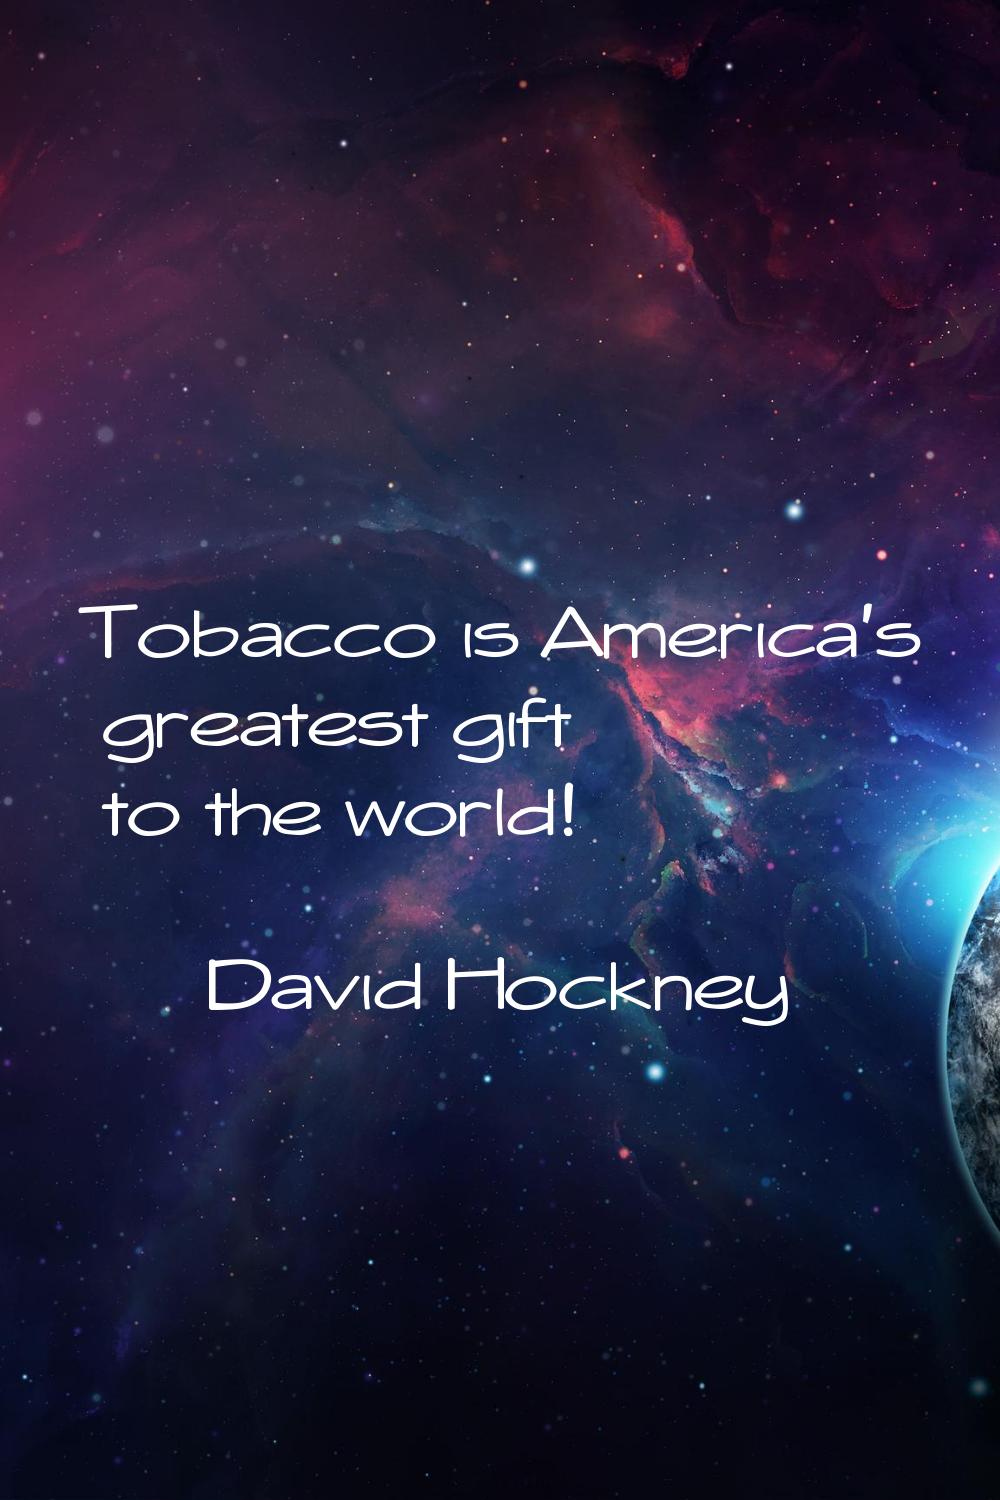 Tobacco is America's greatest gift to the world!